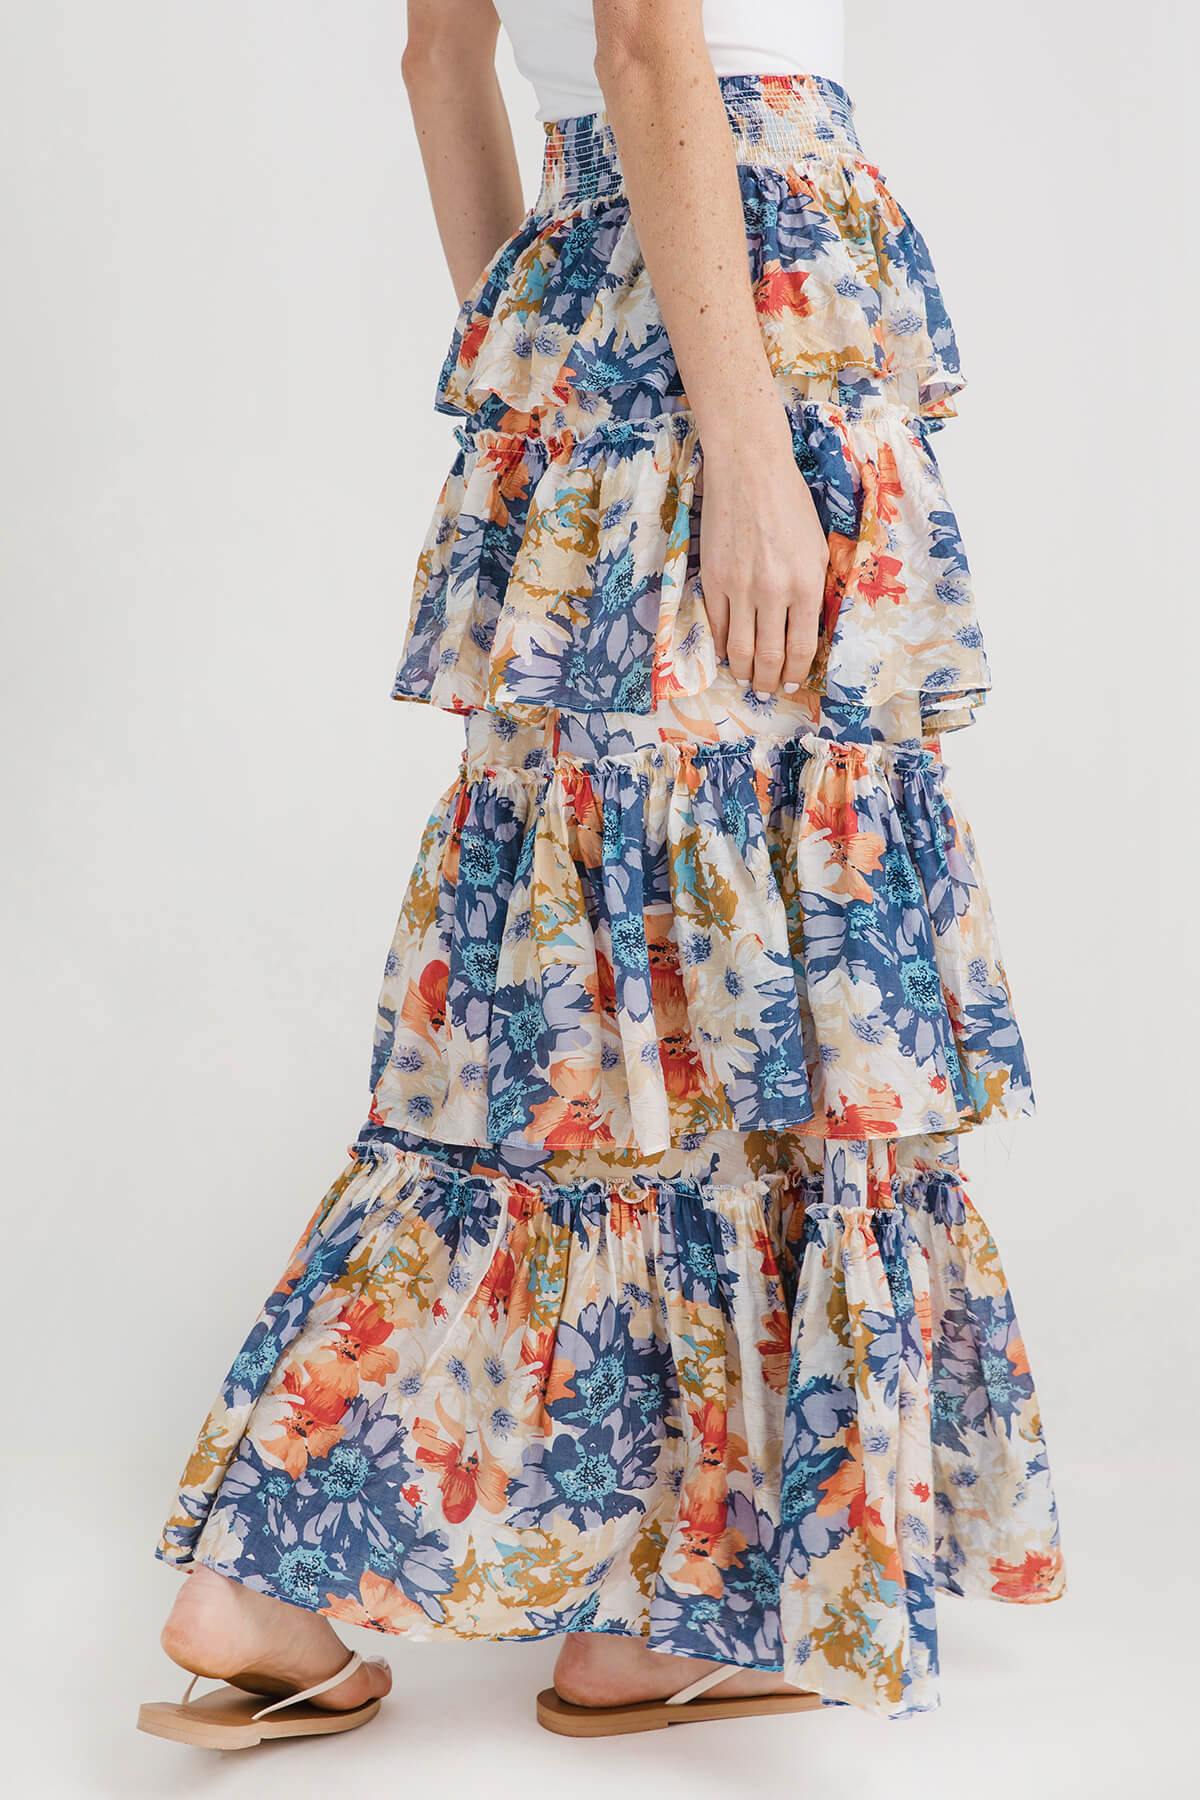 Eesome Floral Tiered Maxi Skirt